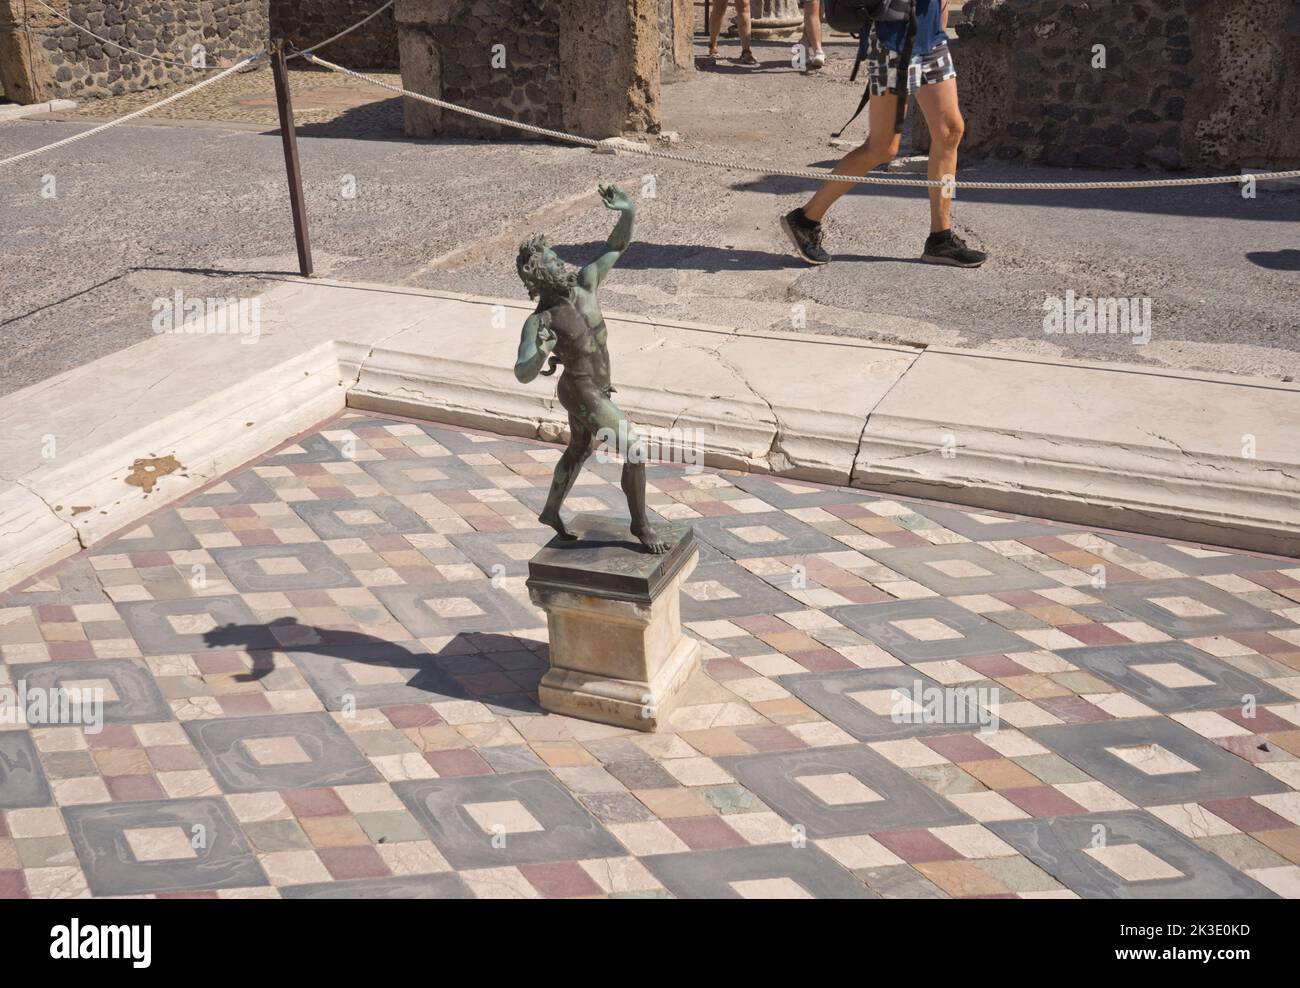 Visitors and views of Pompeii archaelogical site near Naples,Italy Stock Photo